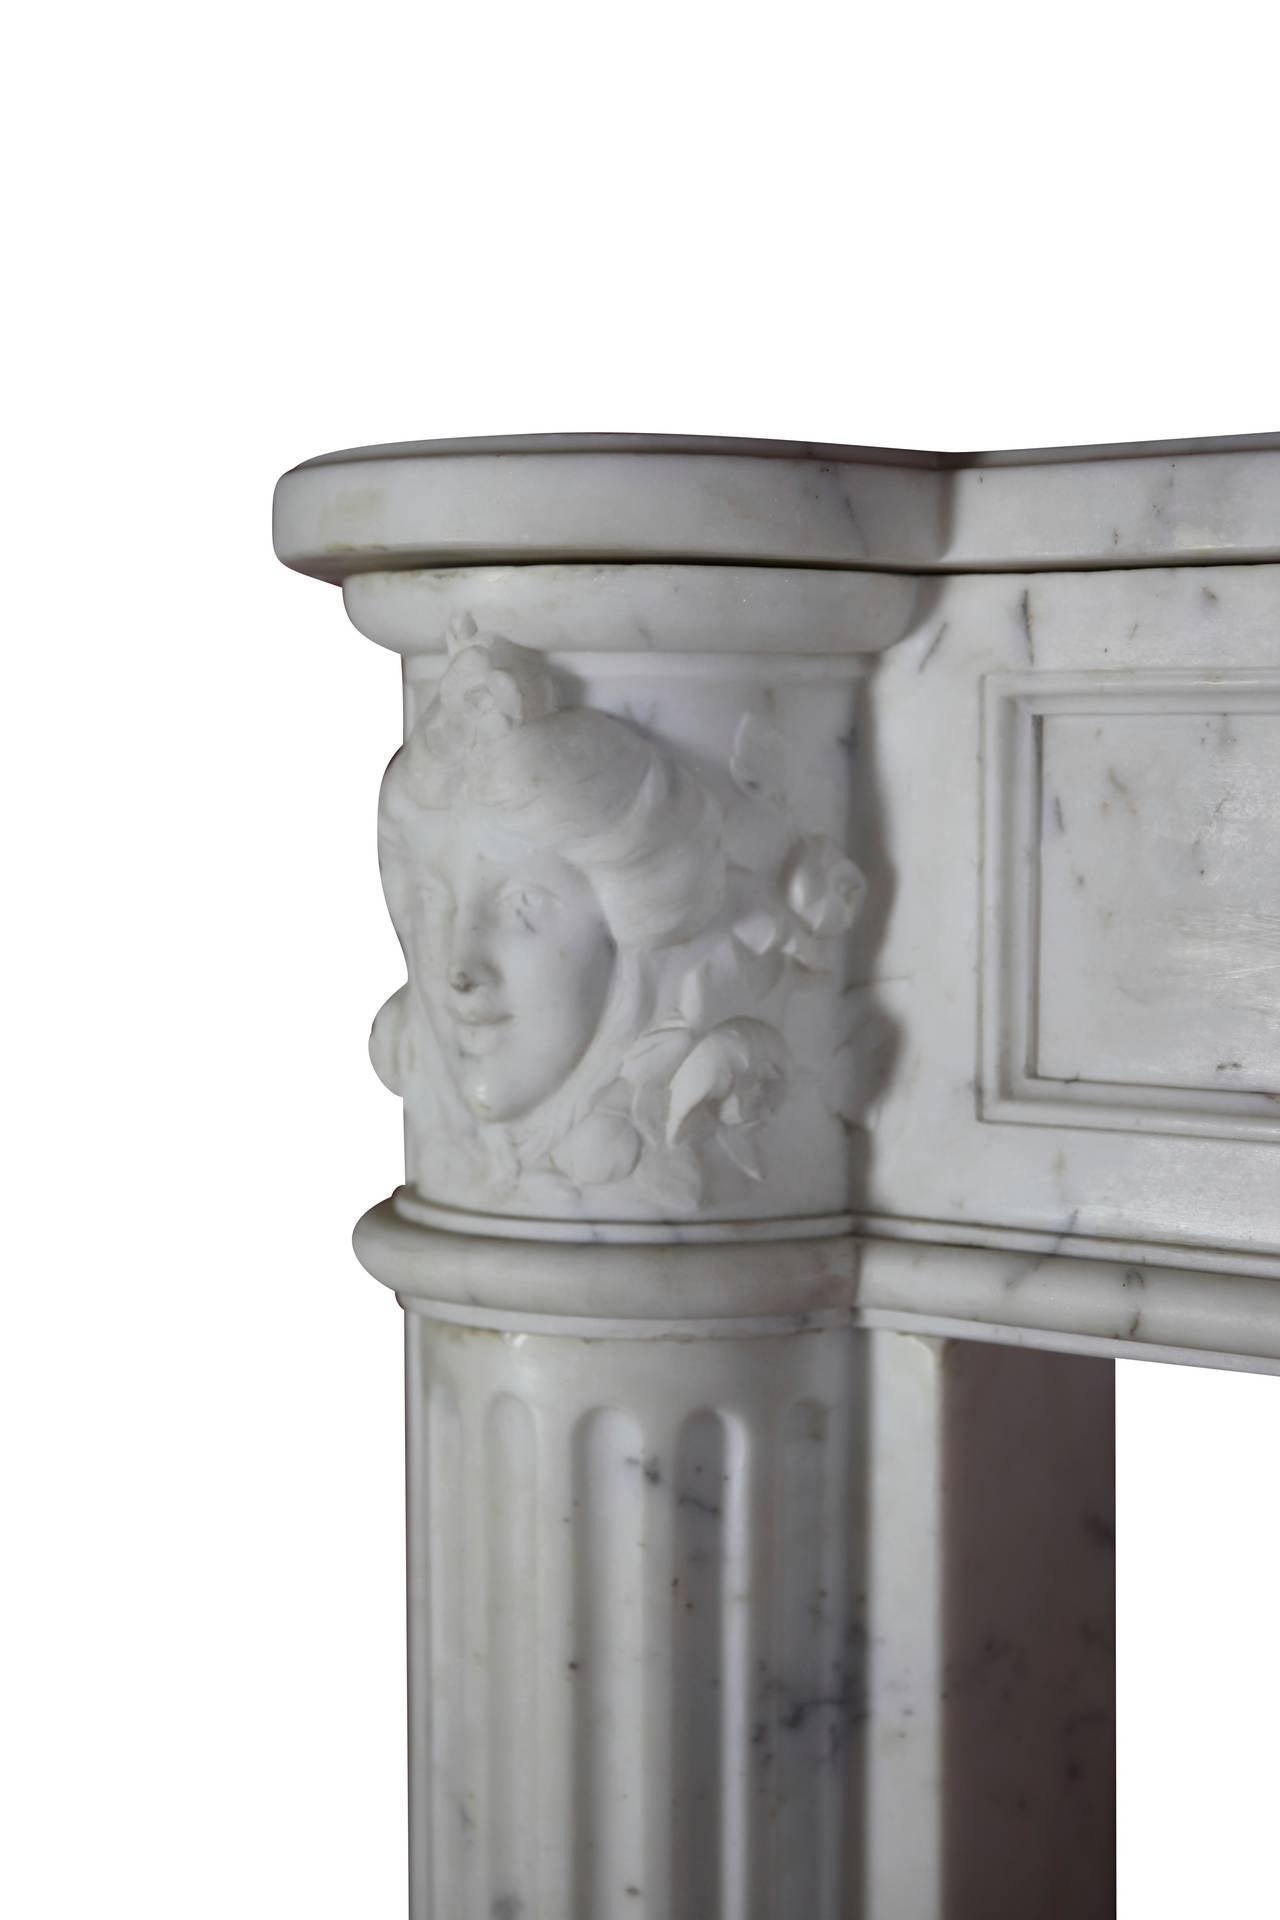 This is a bespoke original antique French fireplace mantel (fireplace) in white statuary marble from the Louis XVI period, 18th century. Exquisite carving. It is still in great condition and ready to be installed. A vintage mantlepiece in a museum